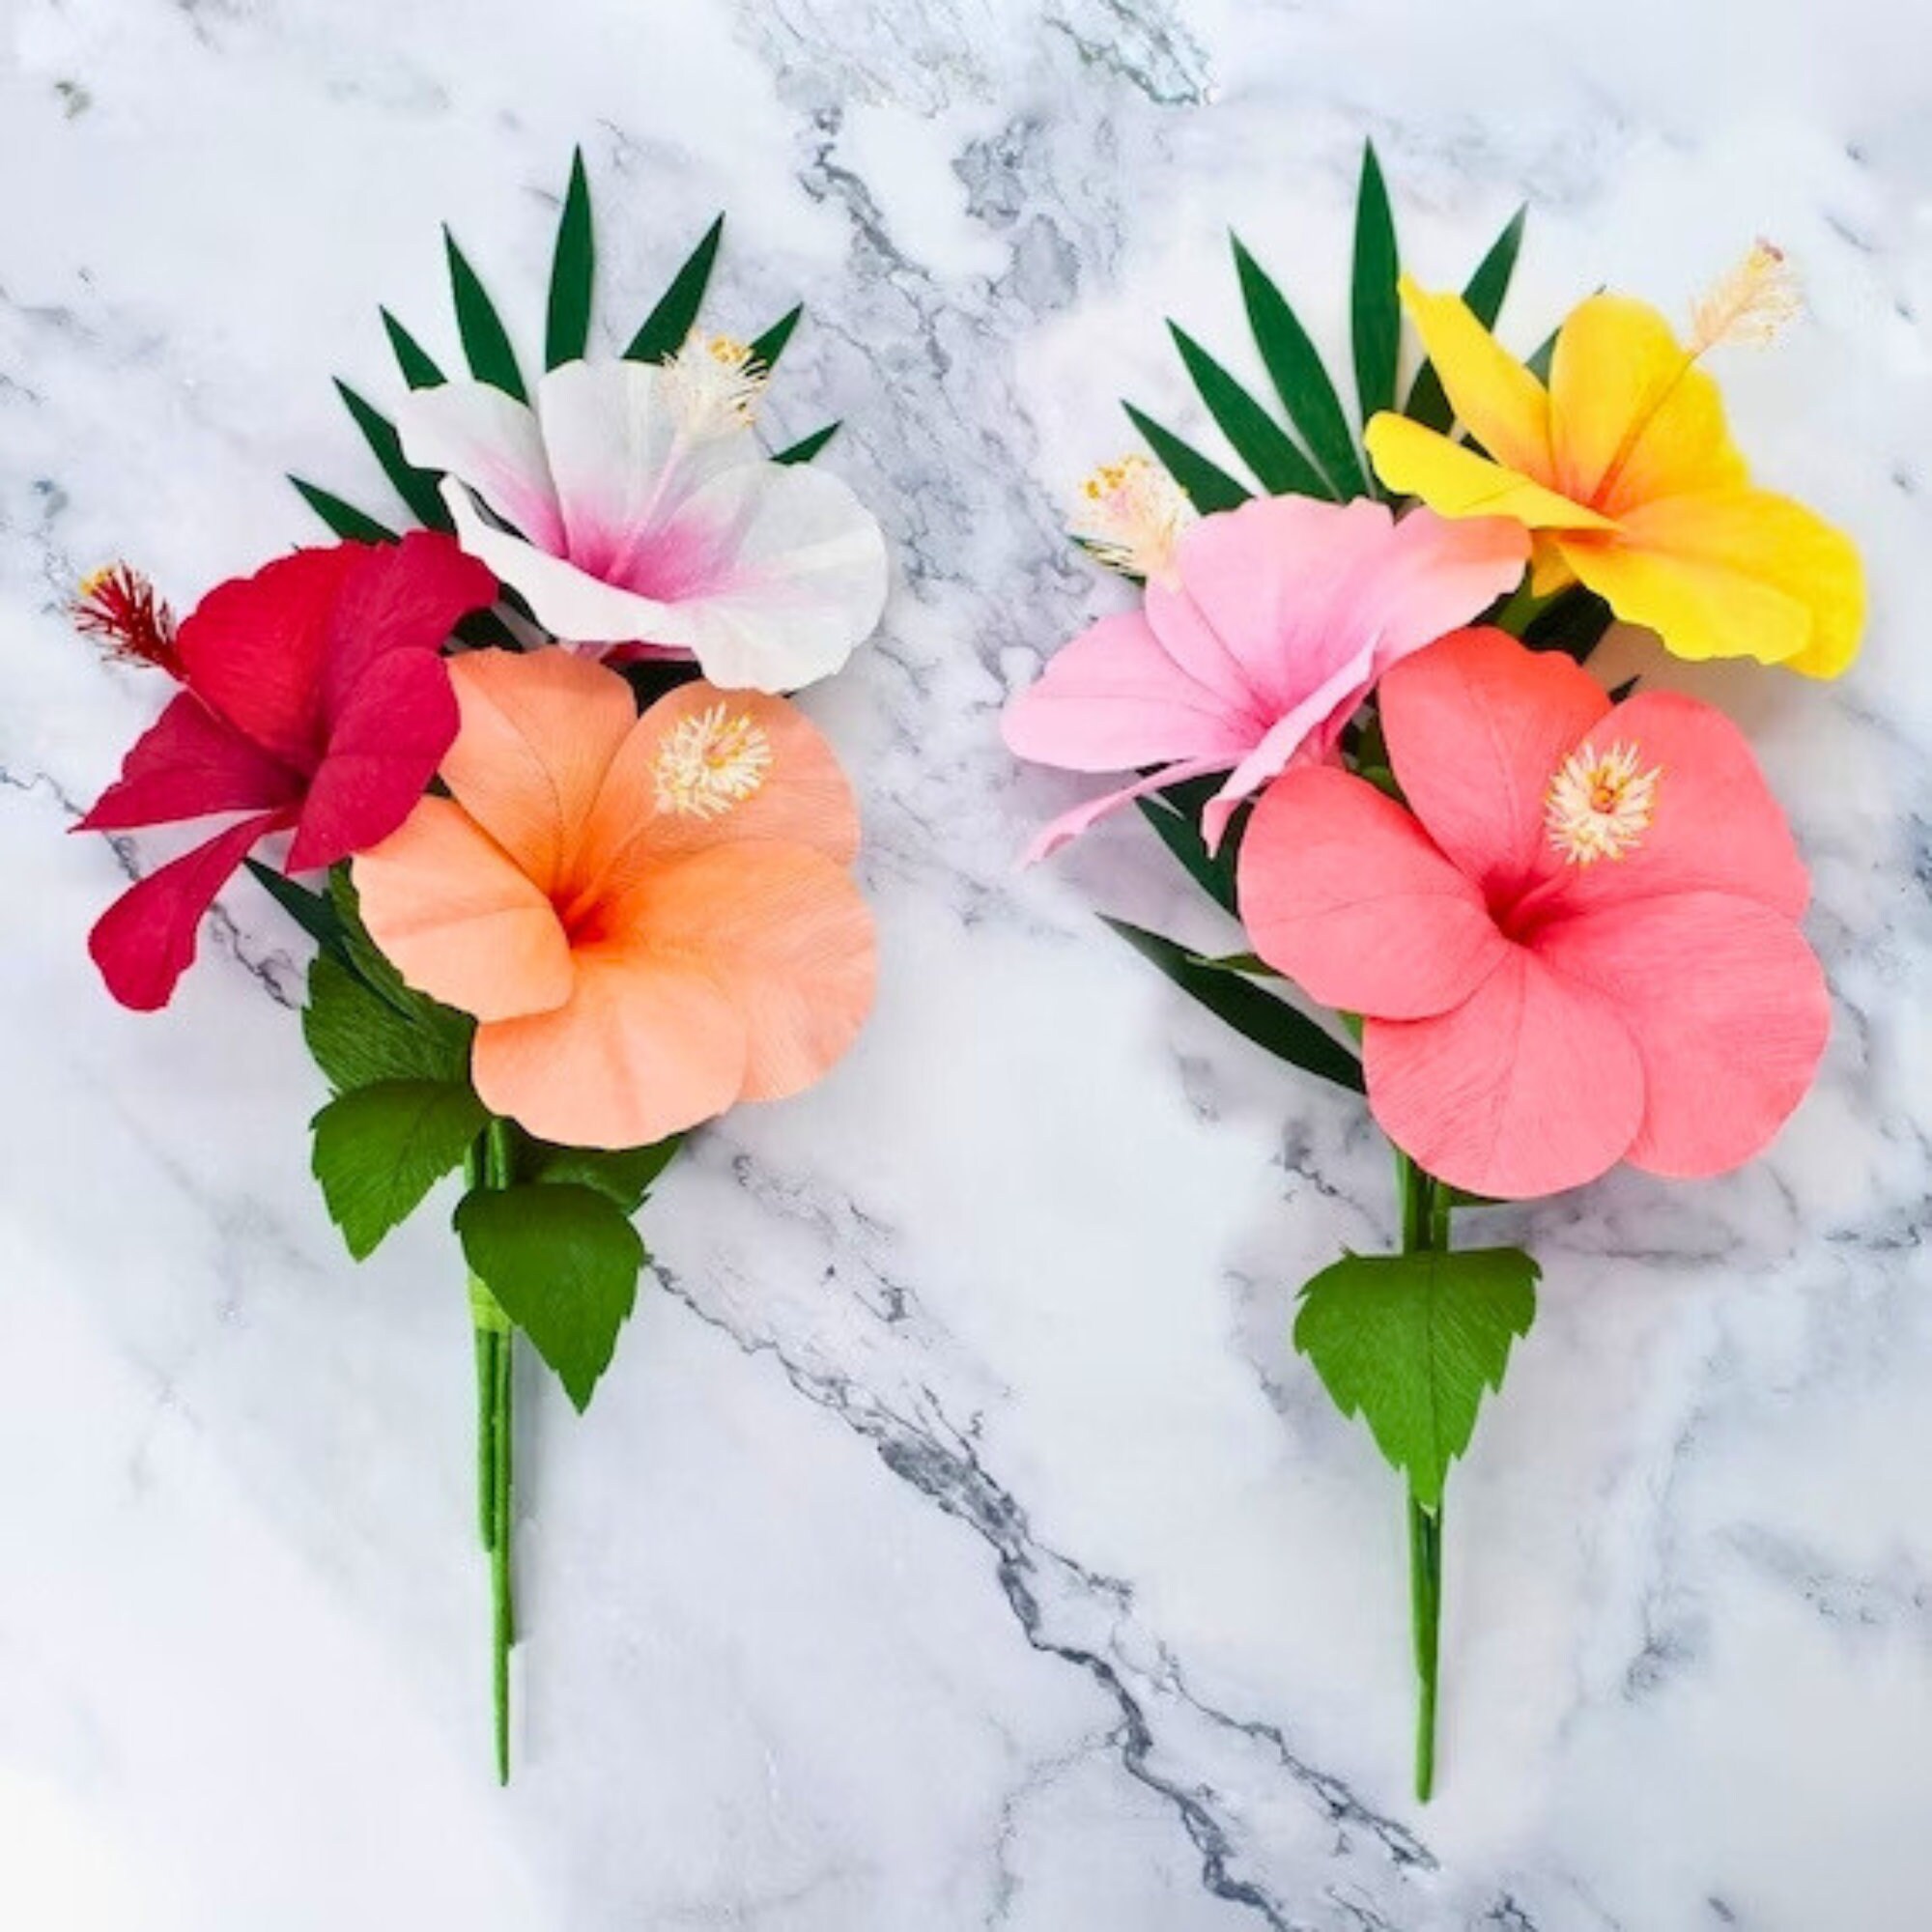 May Member Make: Crepe Paper Hibiscus Flowers - Lia Griffith